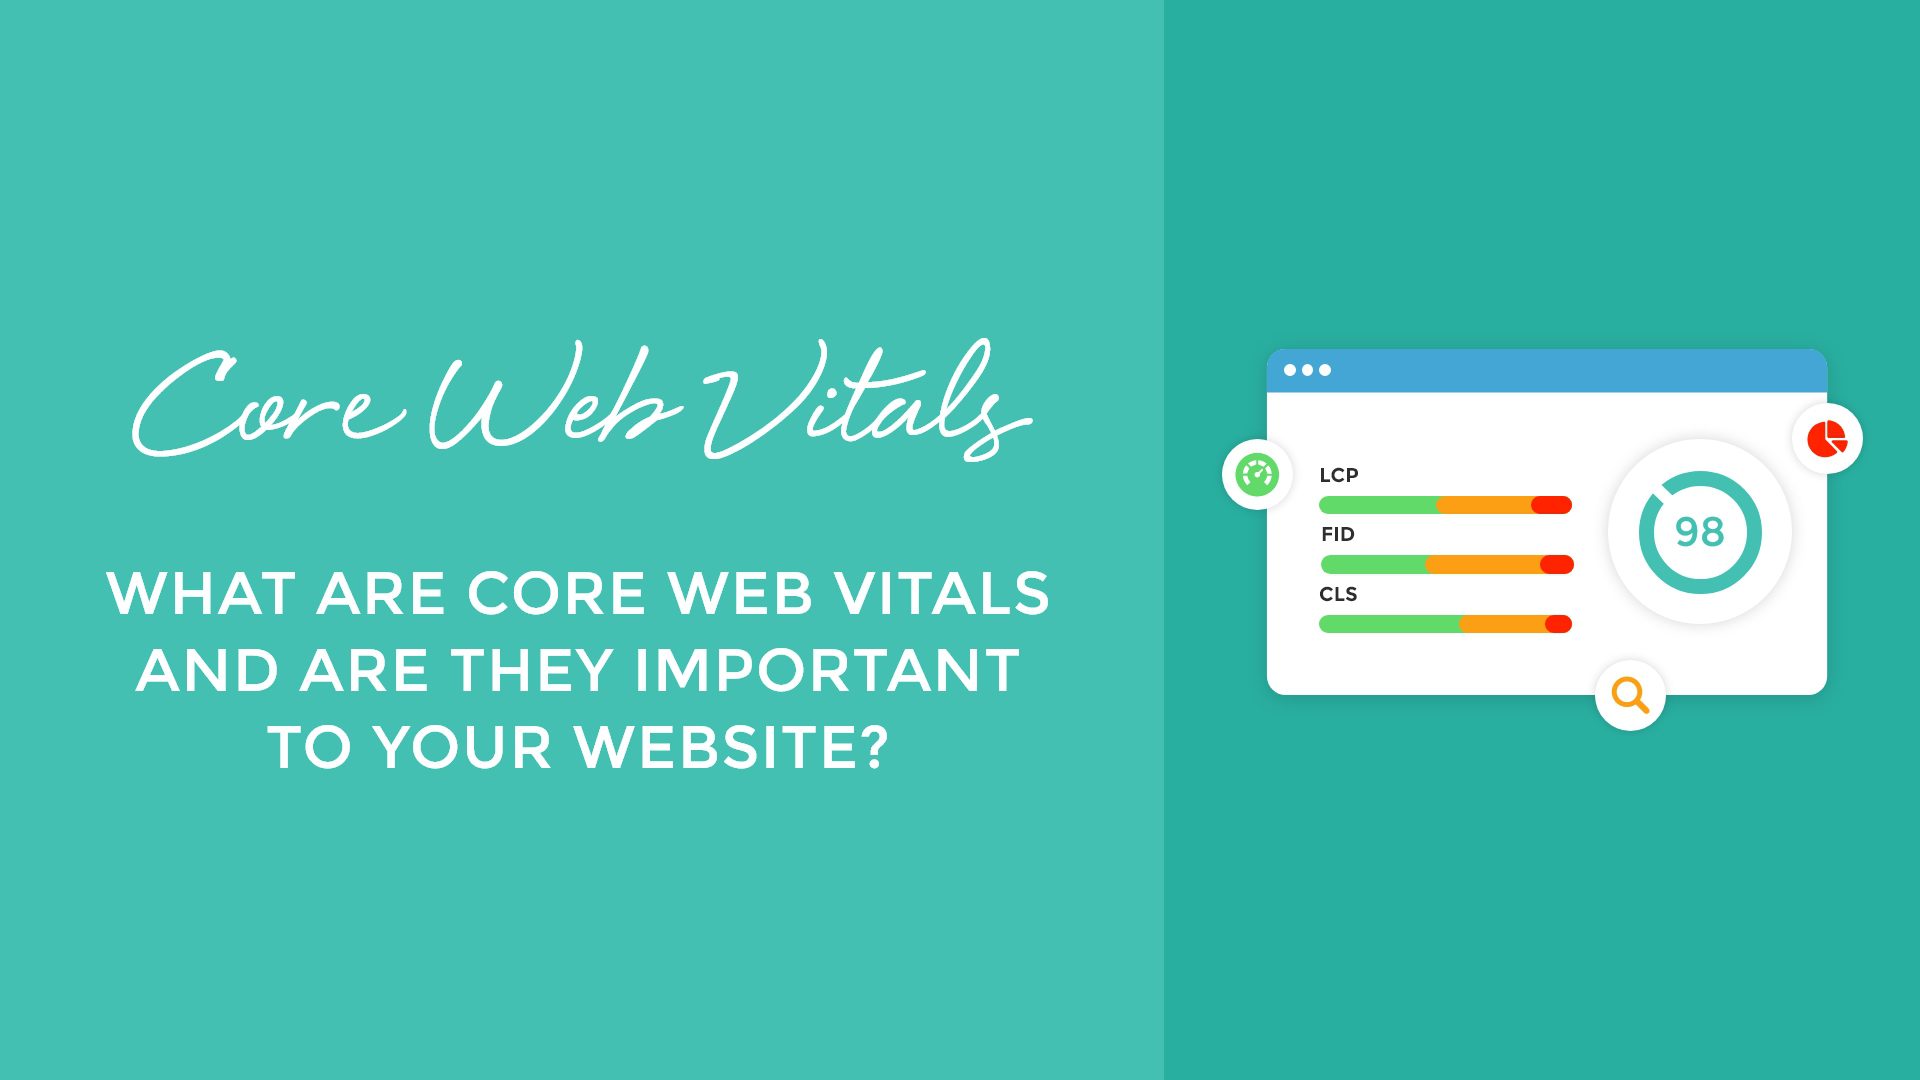 What Are Core Web Vitals and are They Important to Your Website?